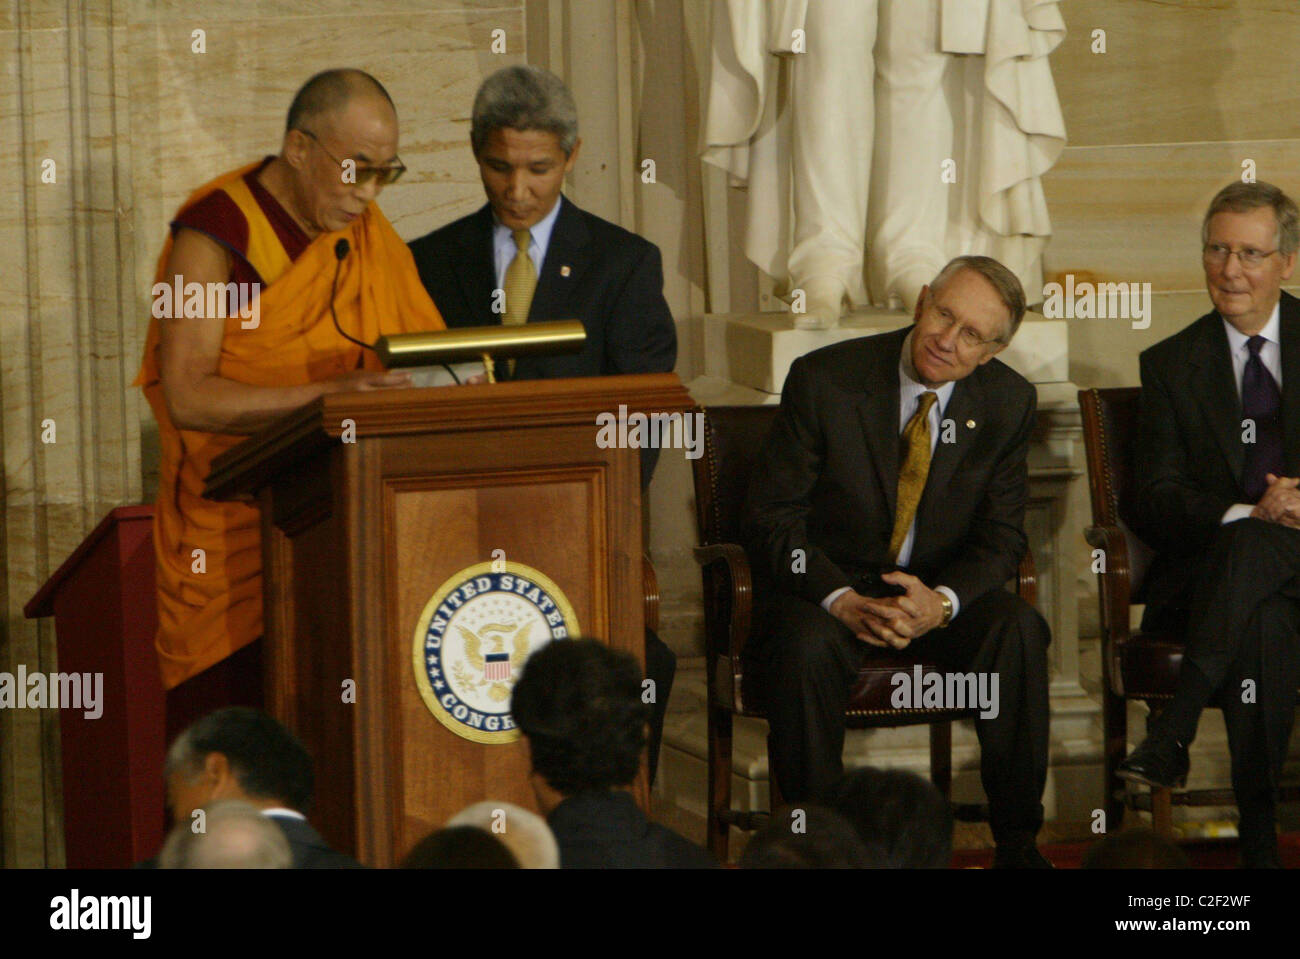 Dalai Lama Congressional Medal Of Honor Was Presented To The Dalai Lama By The Us President